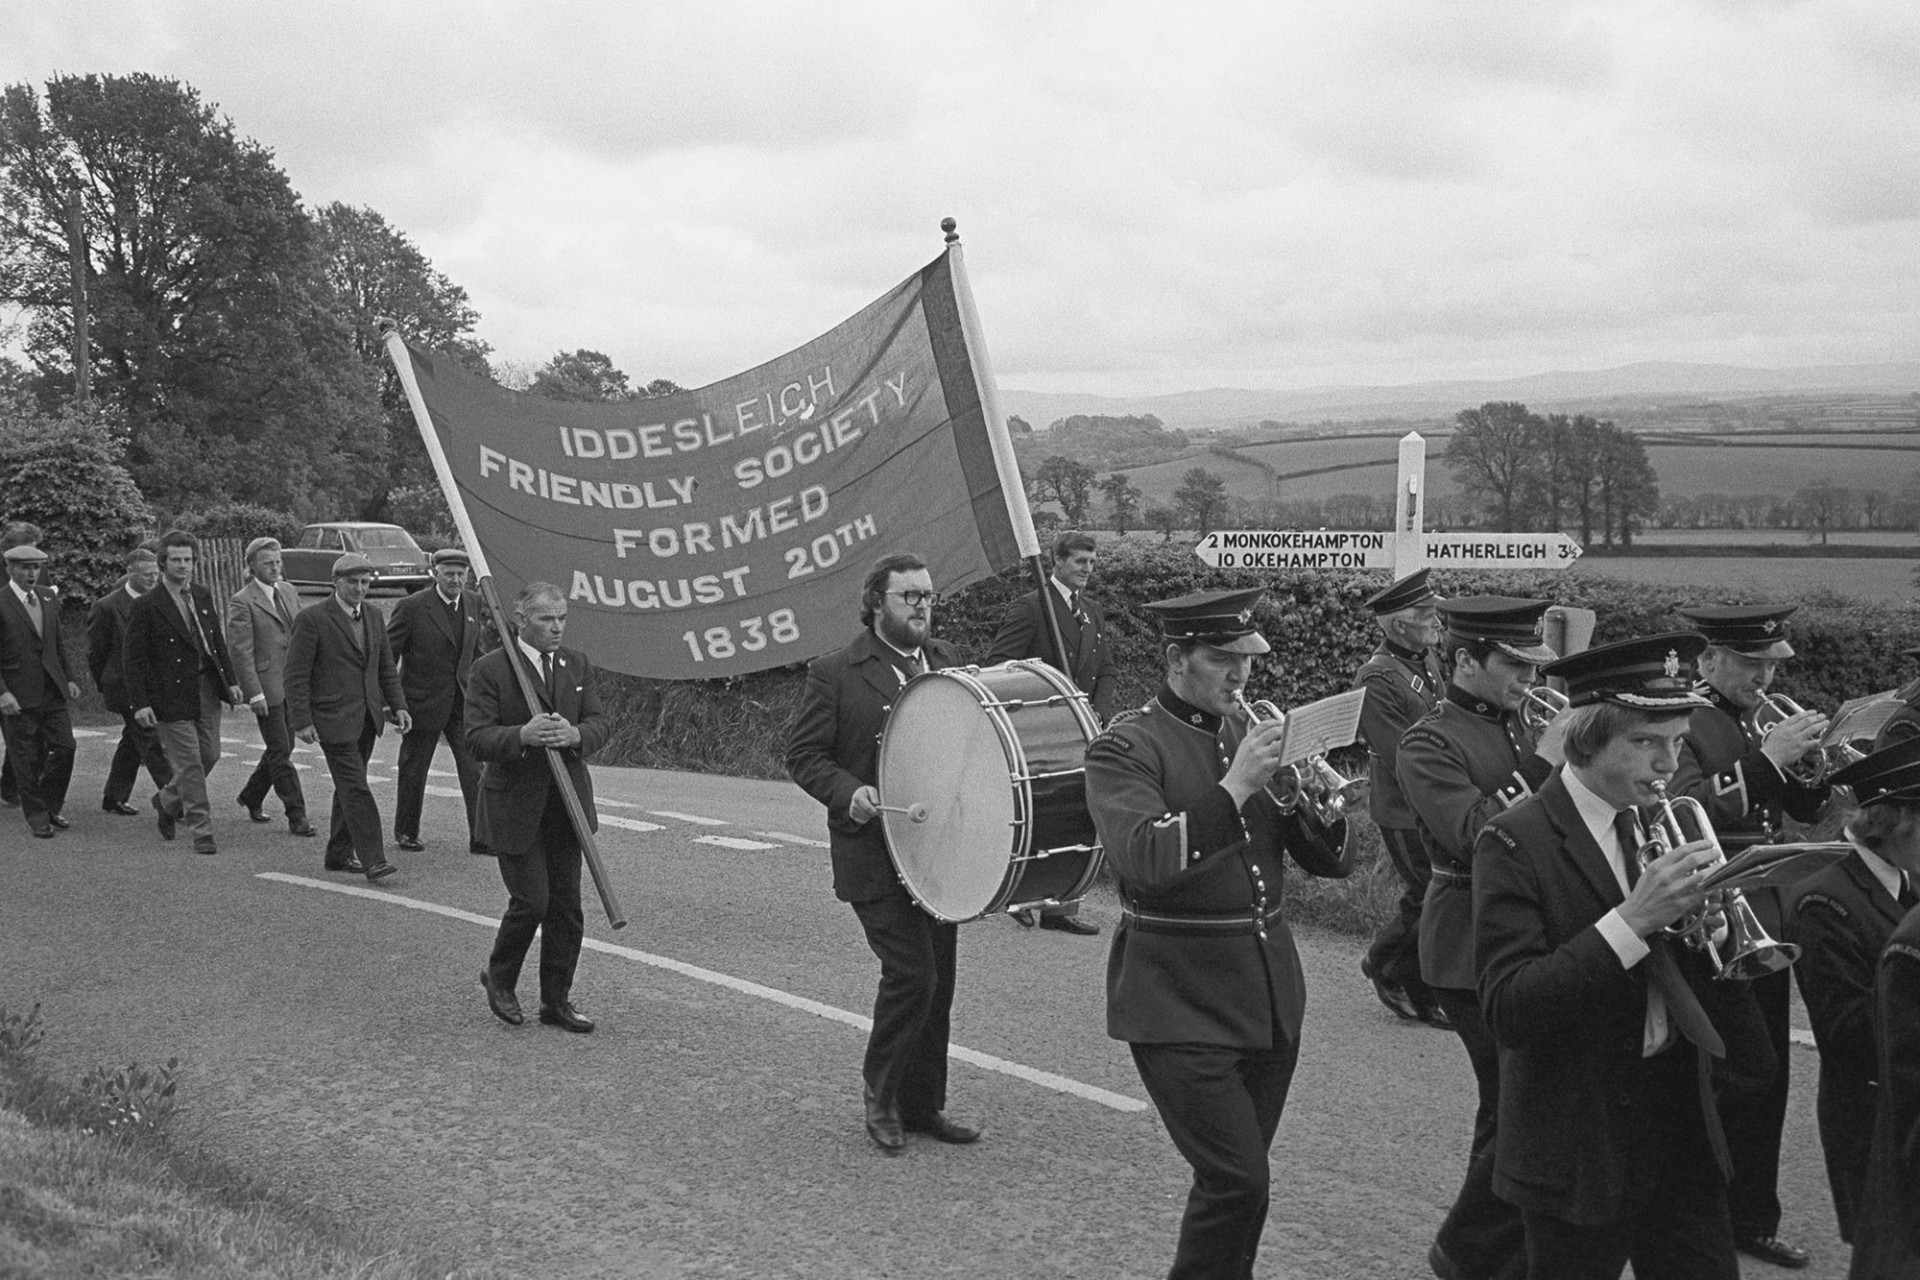 Friendly Society Parade, silver band, banner and members.
[Hatherleigh Silver Band leading the Iddesleigh Friendly Society Club Day parade. Two men are carrying a banner in the parade. The parade is passing a signpost.]